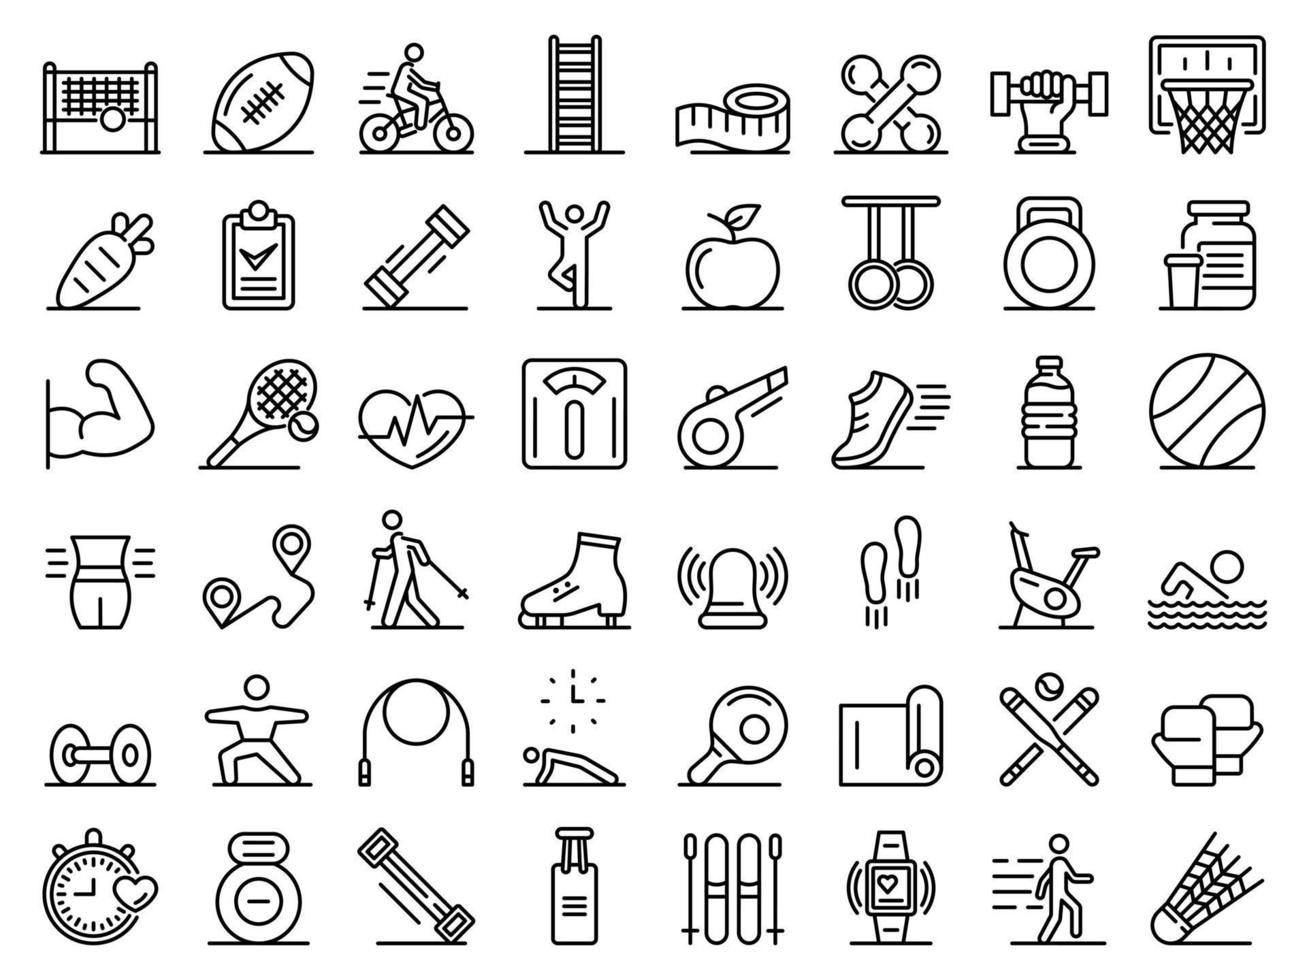 Outdoor fitness icons set, outline style vector